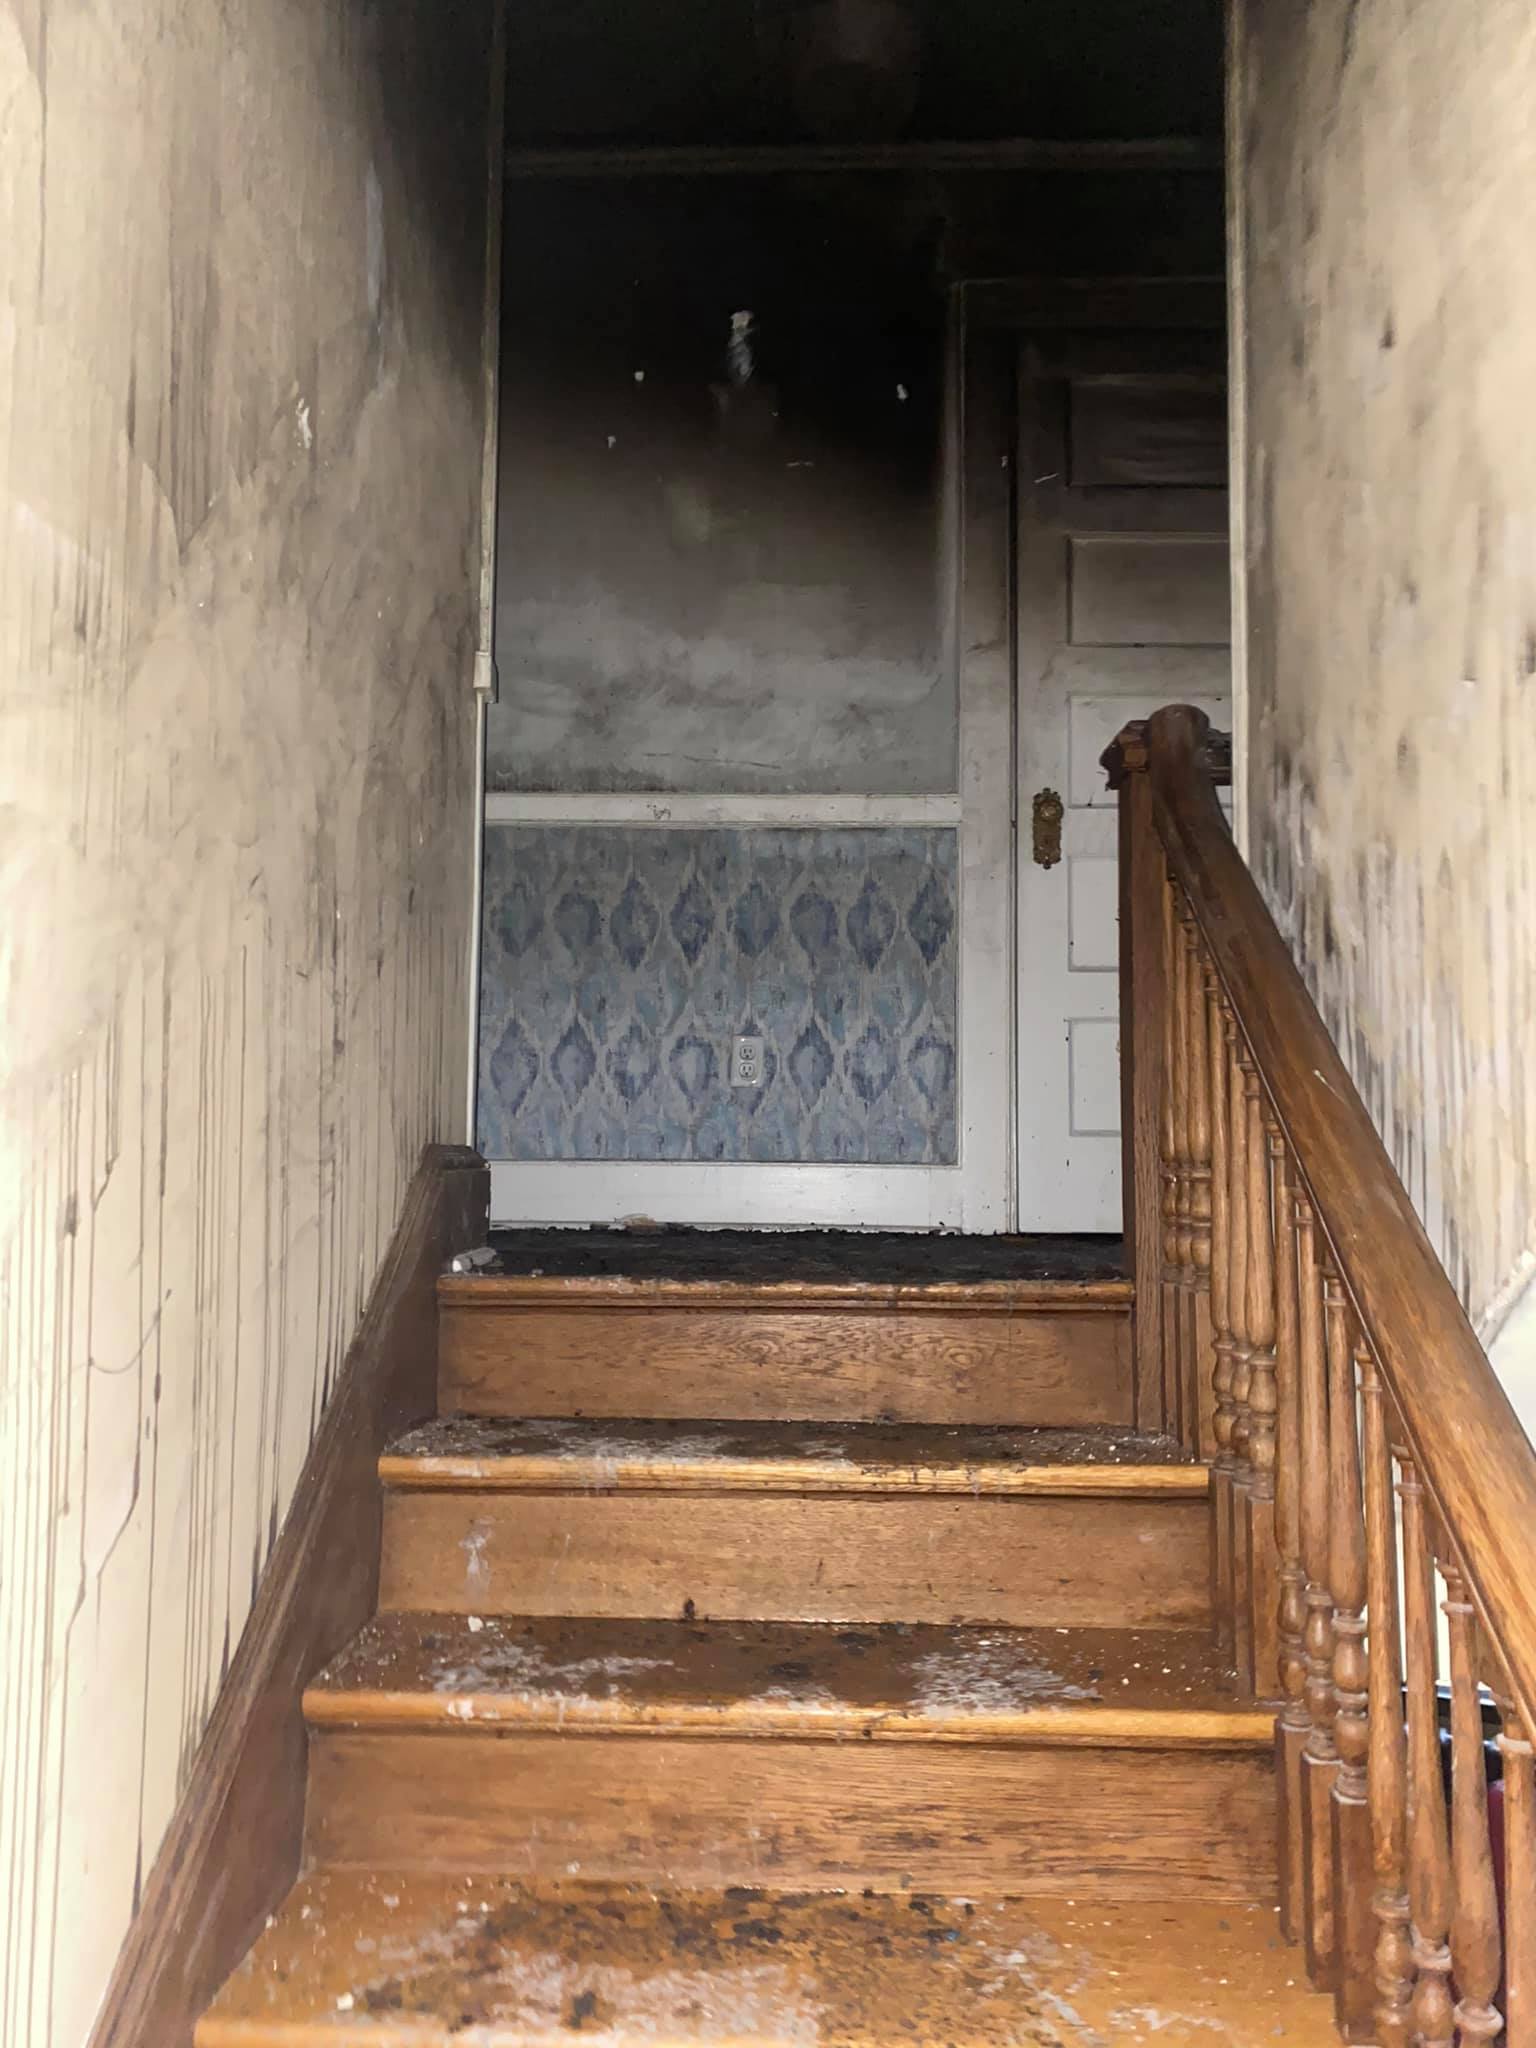 removing smoke damage and smoke odor after a fire albany ny